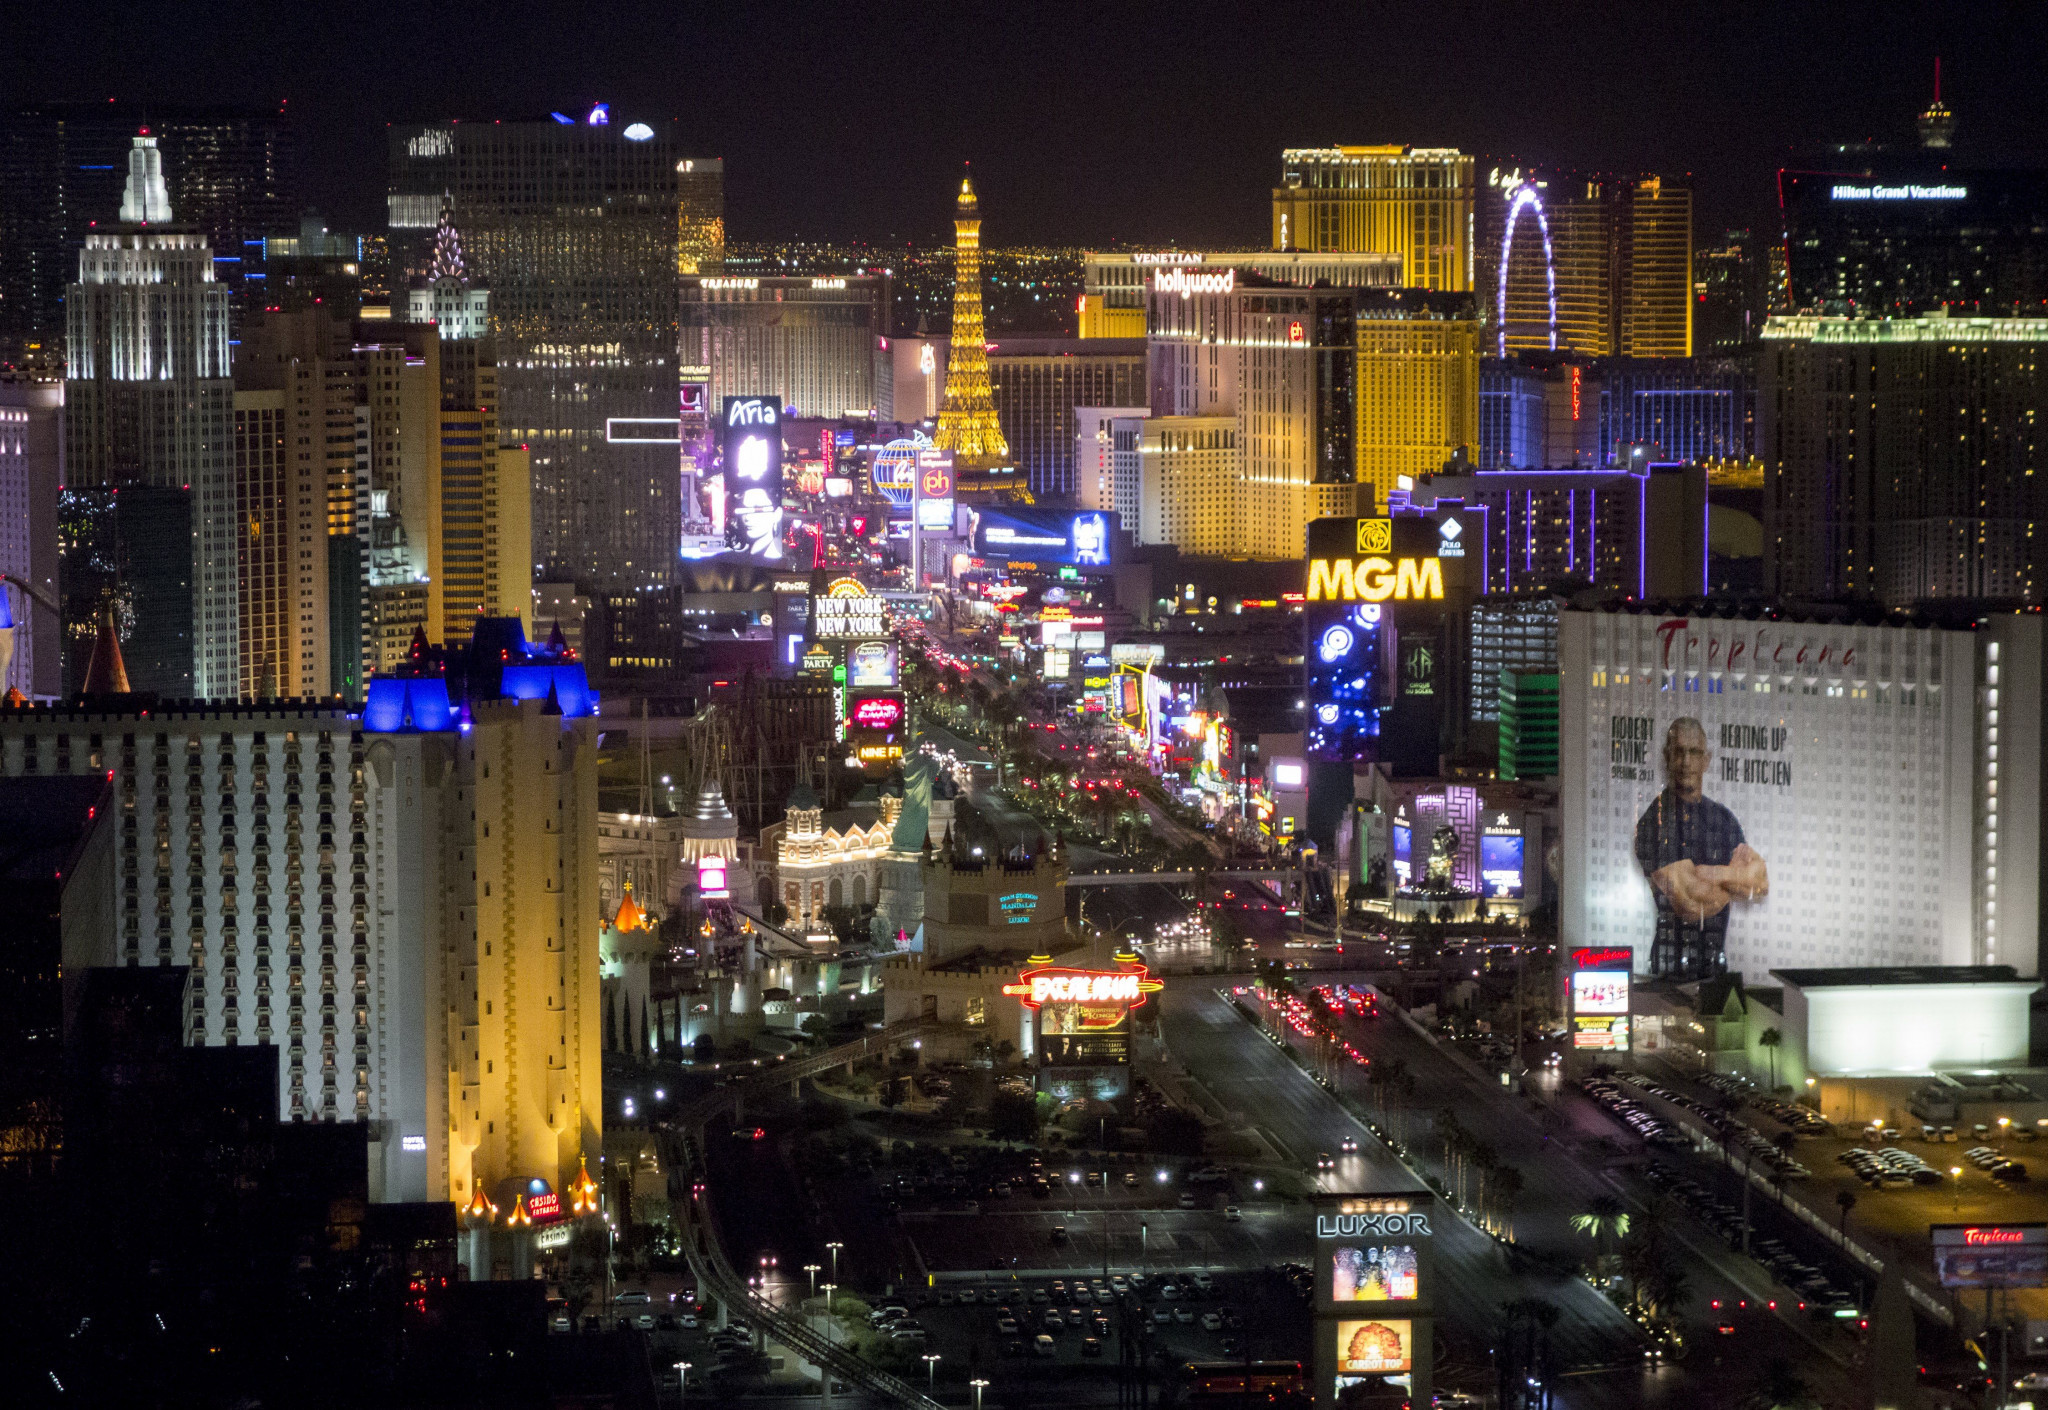 Las Vegas benefited economically and socially from hosting this year's World Men's Curling Championships, an economic impact study has claimed ©Getty Images